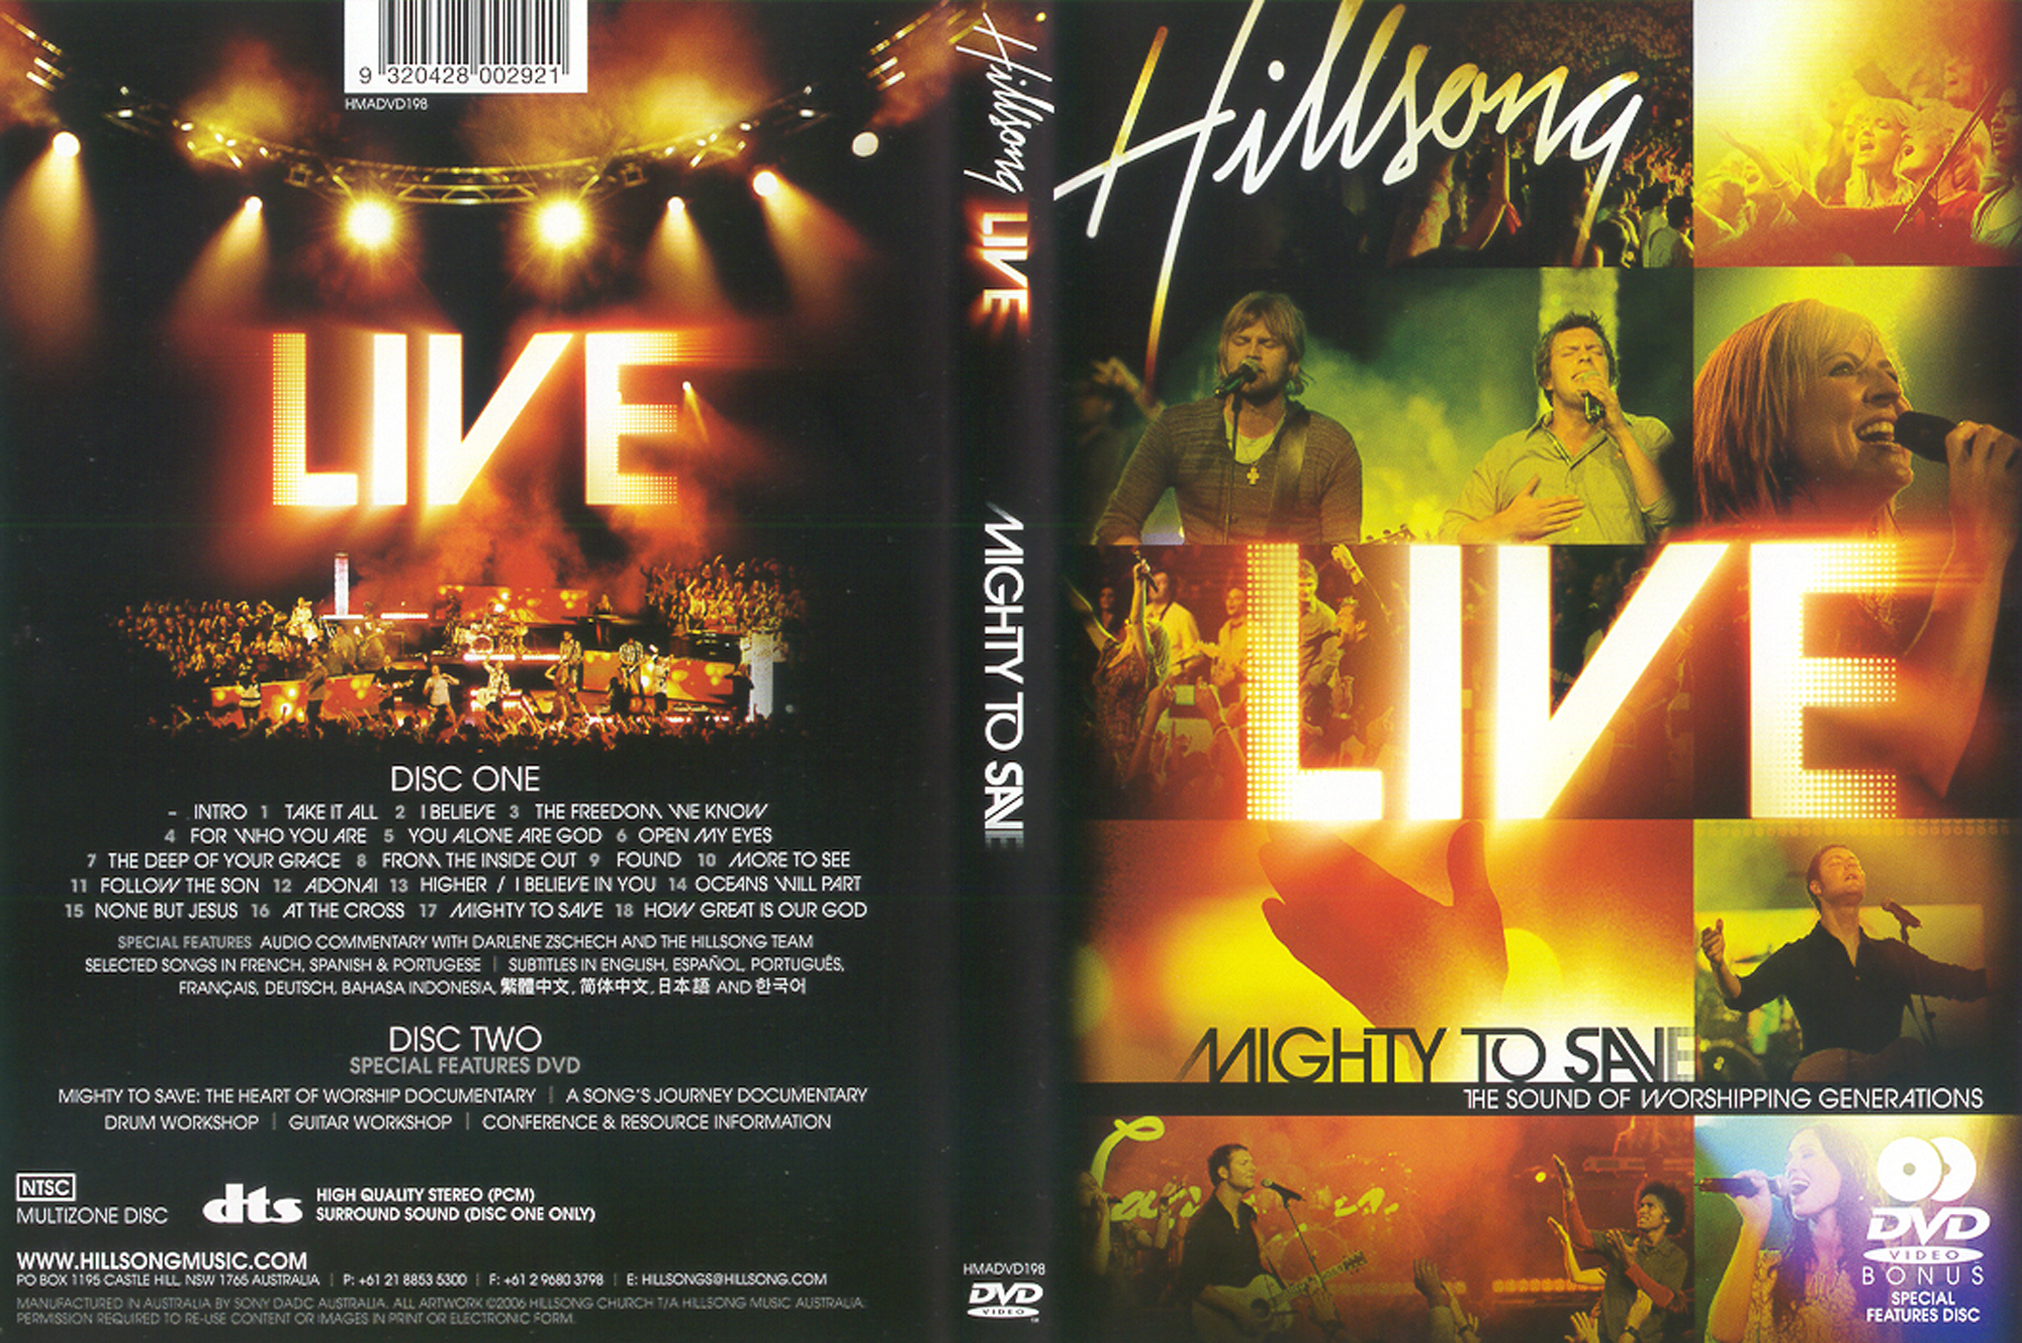 Jaquette DVD Hillsong Mighty to save